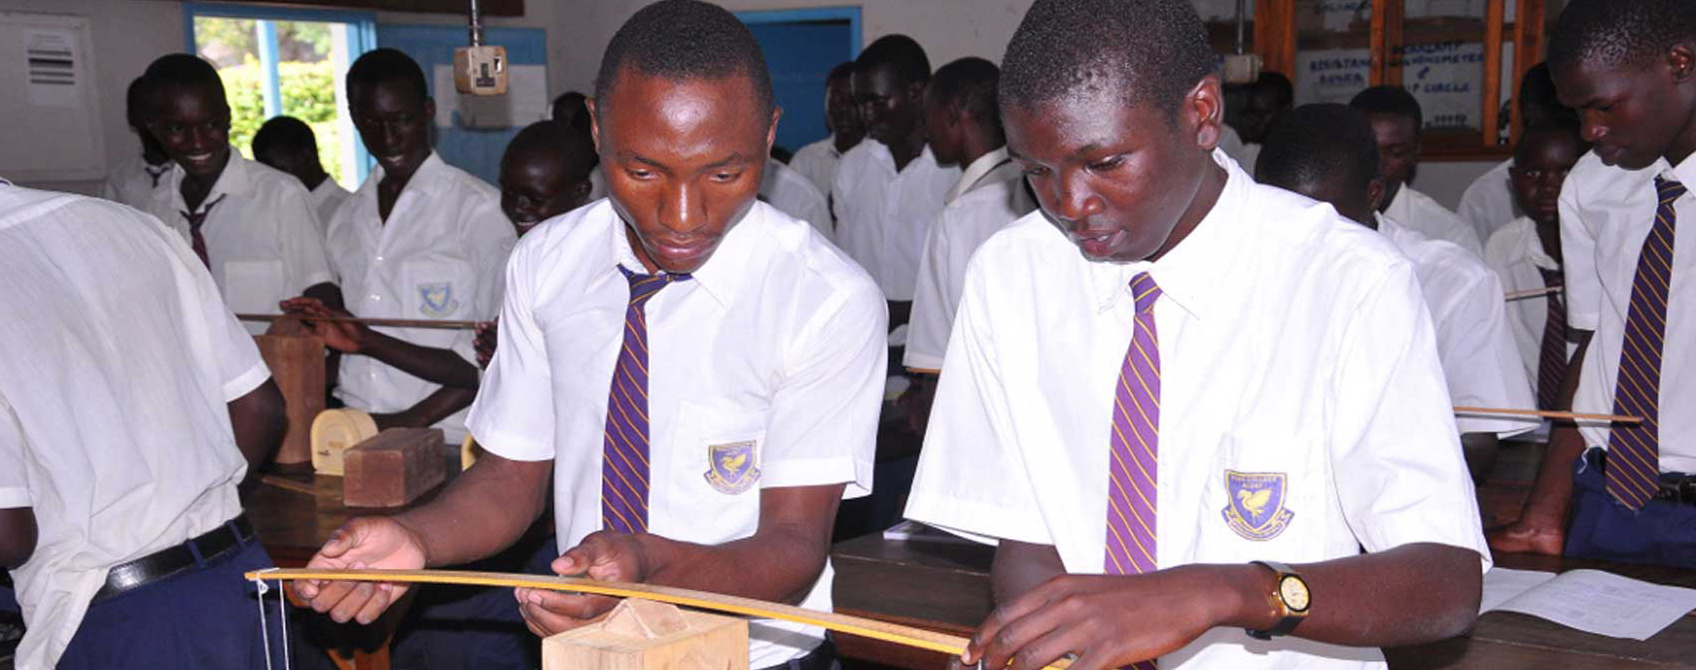 UGANDA ADVANCED CERTIFICATE OF EDUCATION PHYSICS PAST PAPERS PAPER 1 6